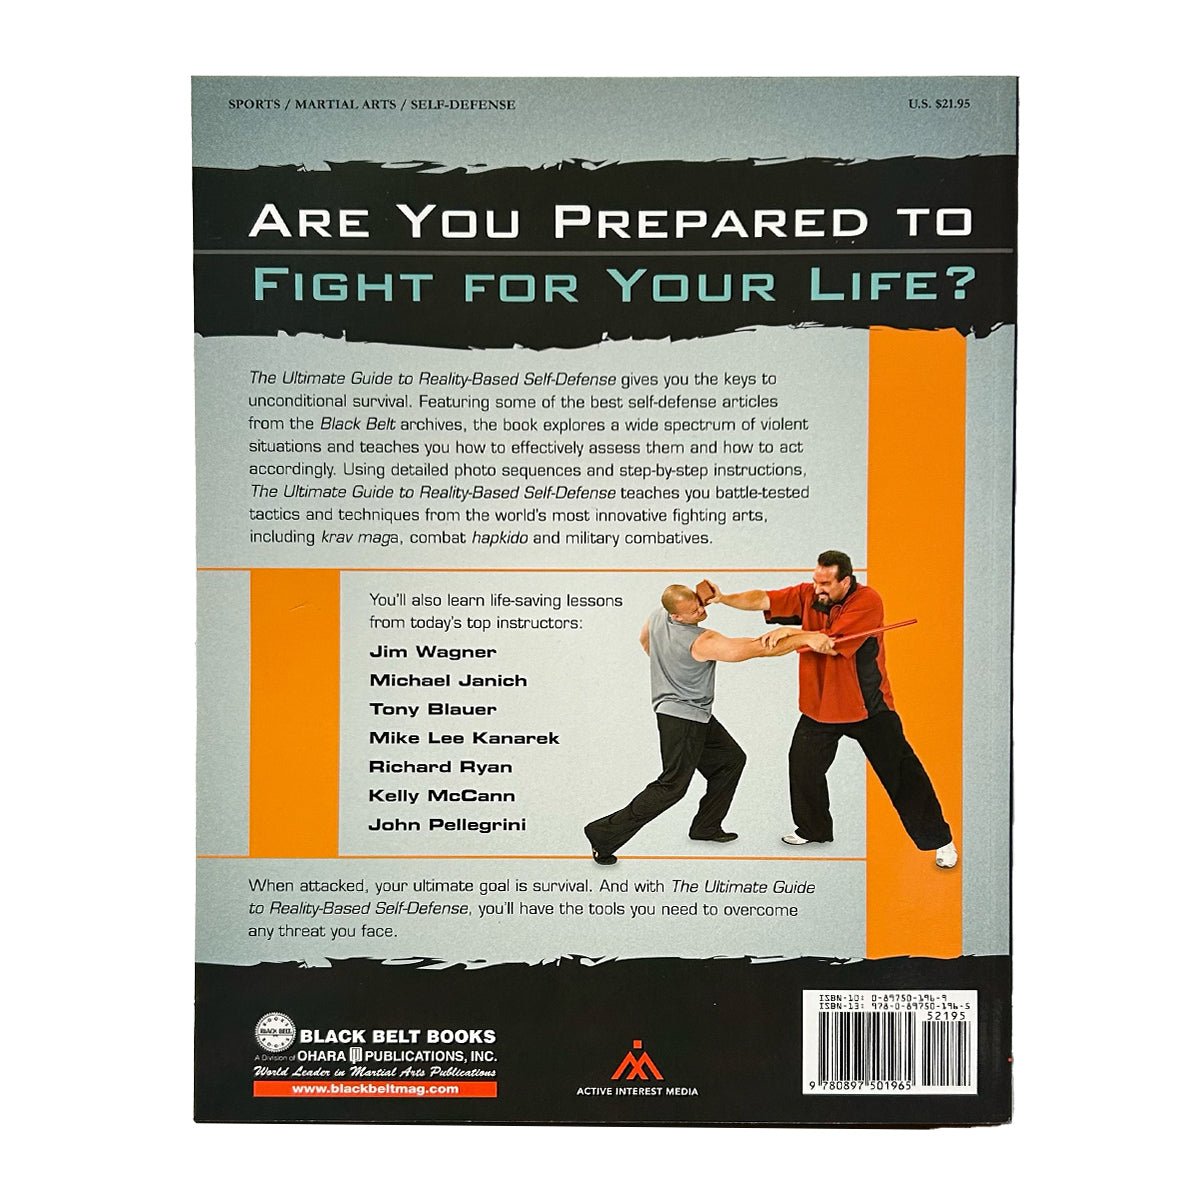 The Ultimate Guide to Reality Based Self Defense